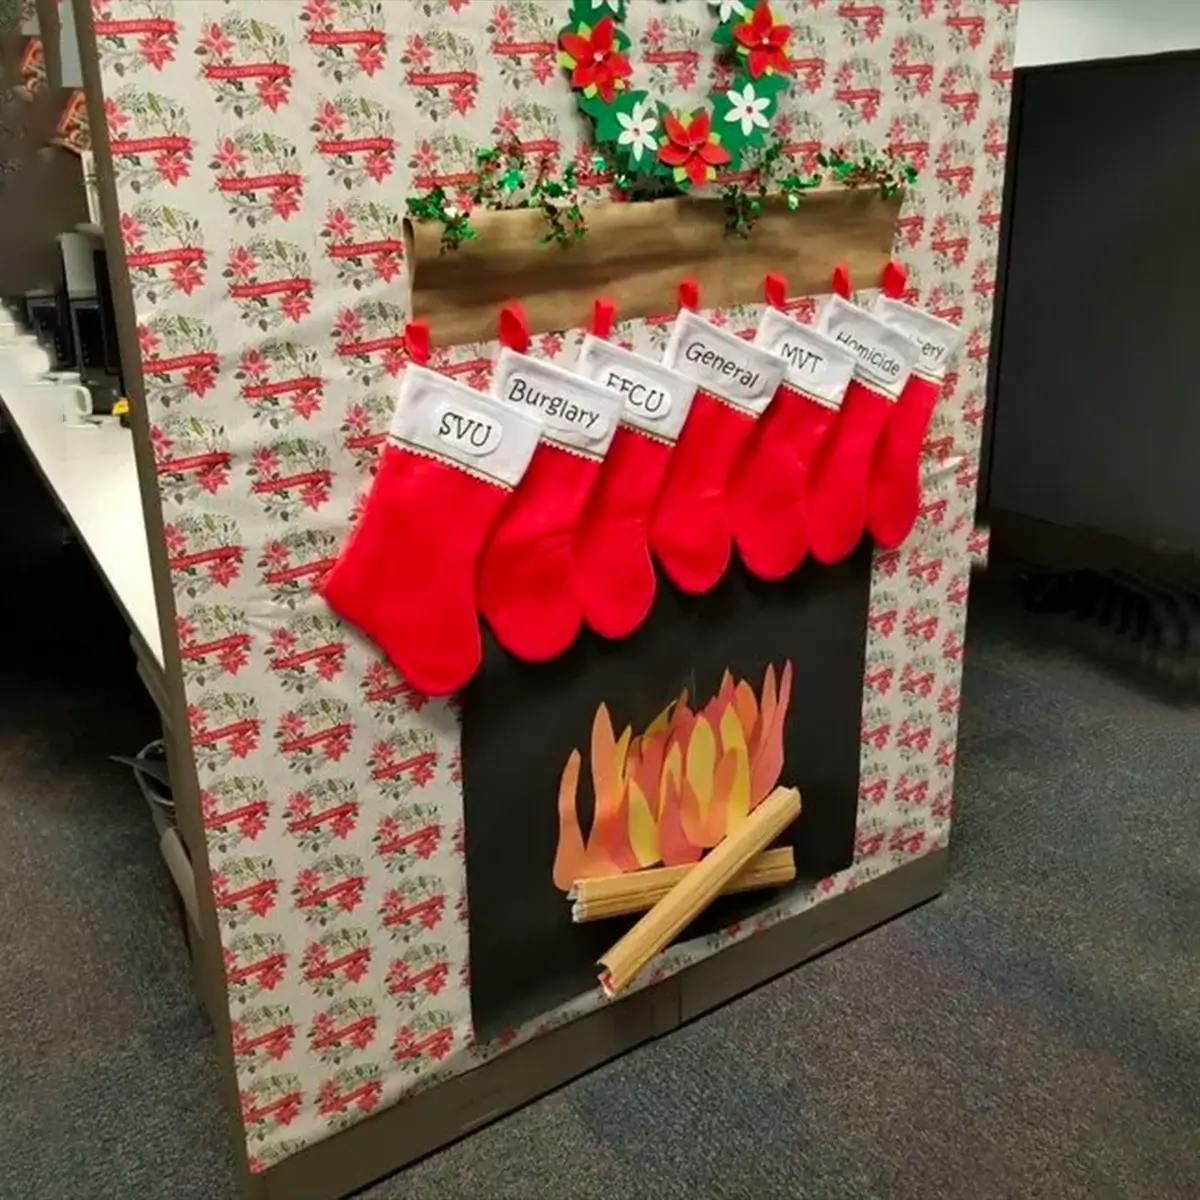 Cubicle wall decorated to look like a fireplace, with stockings hung on the mantelpiece.